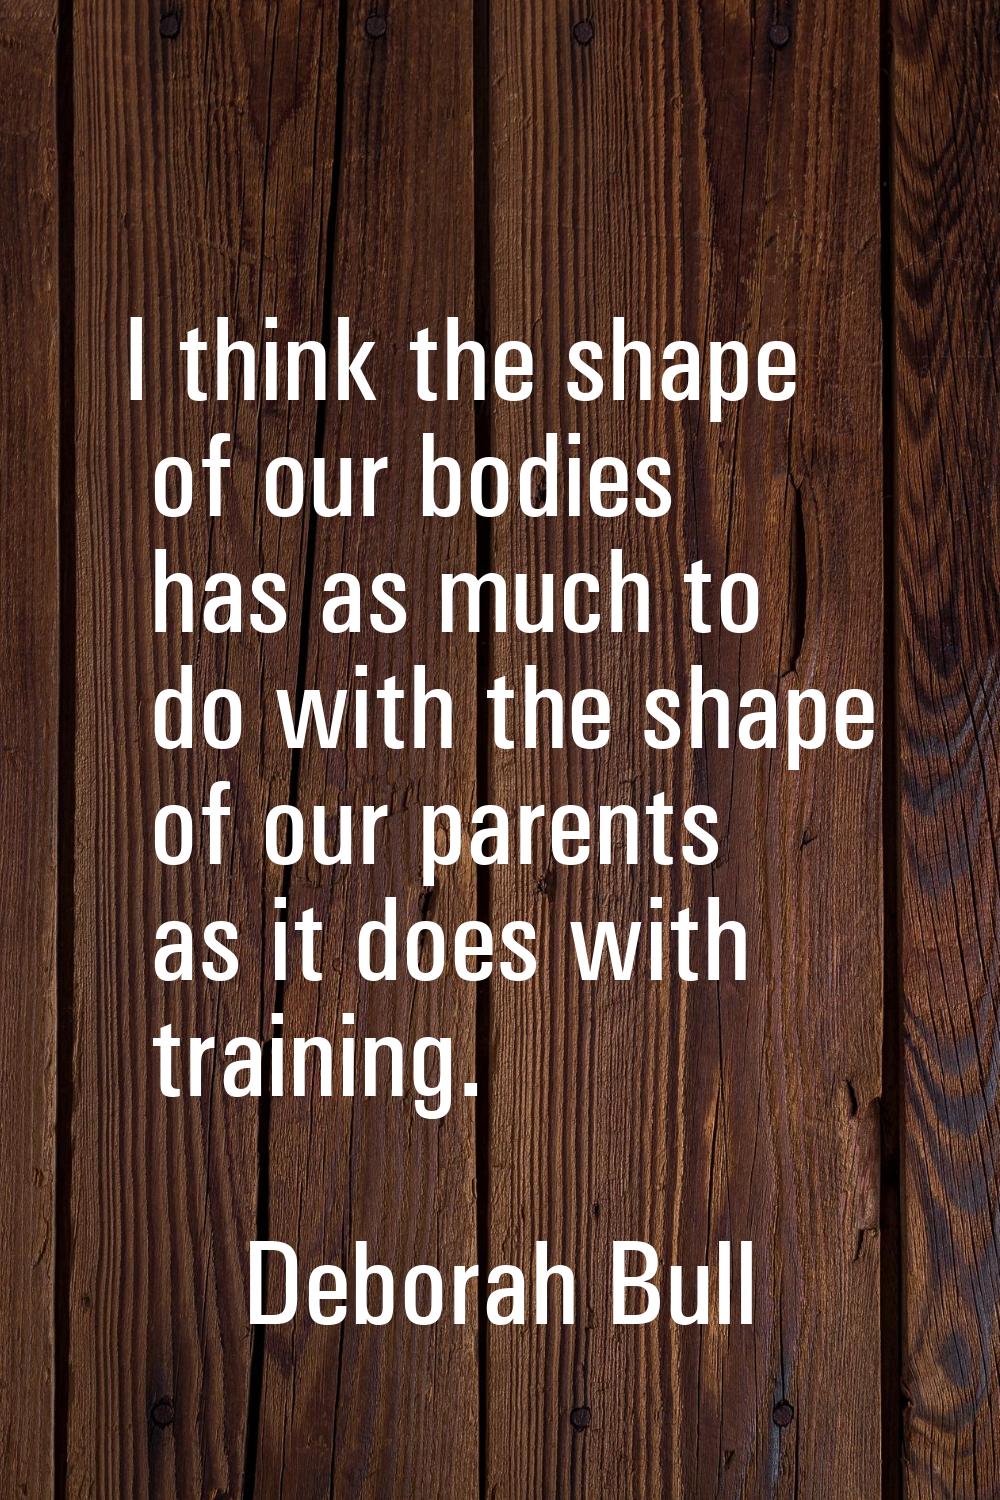 I think the shape of our bodies has as much to do with the shape of our parents as it does with tra